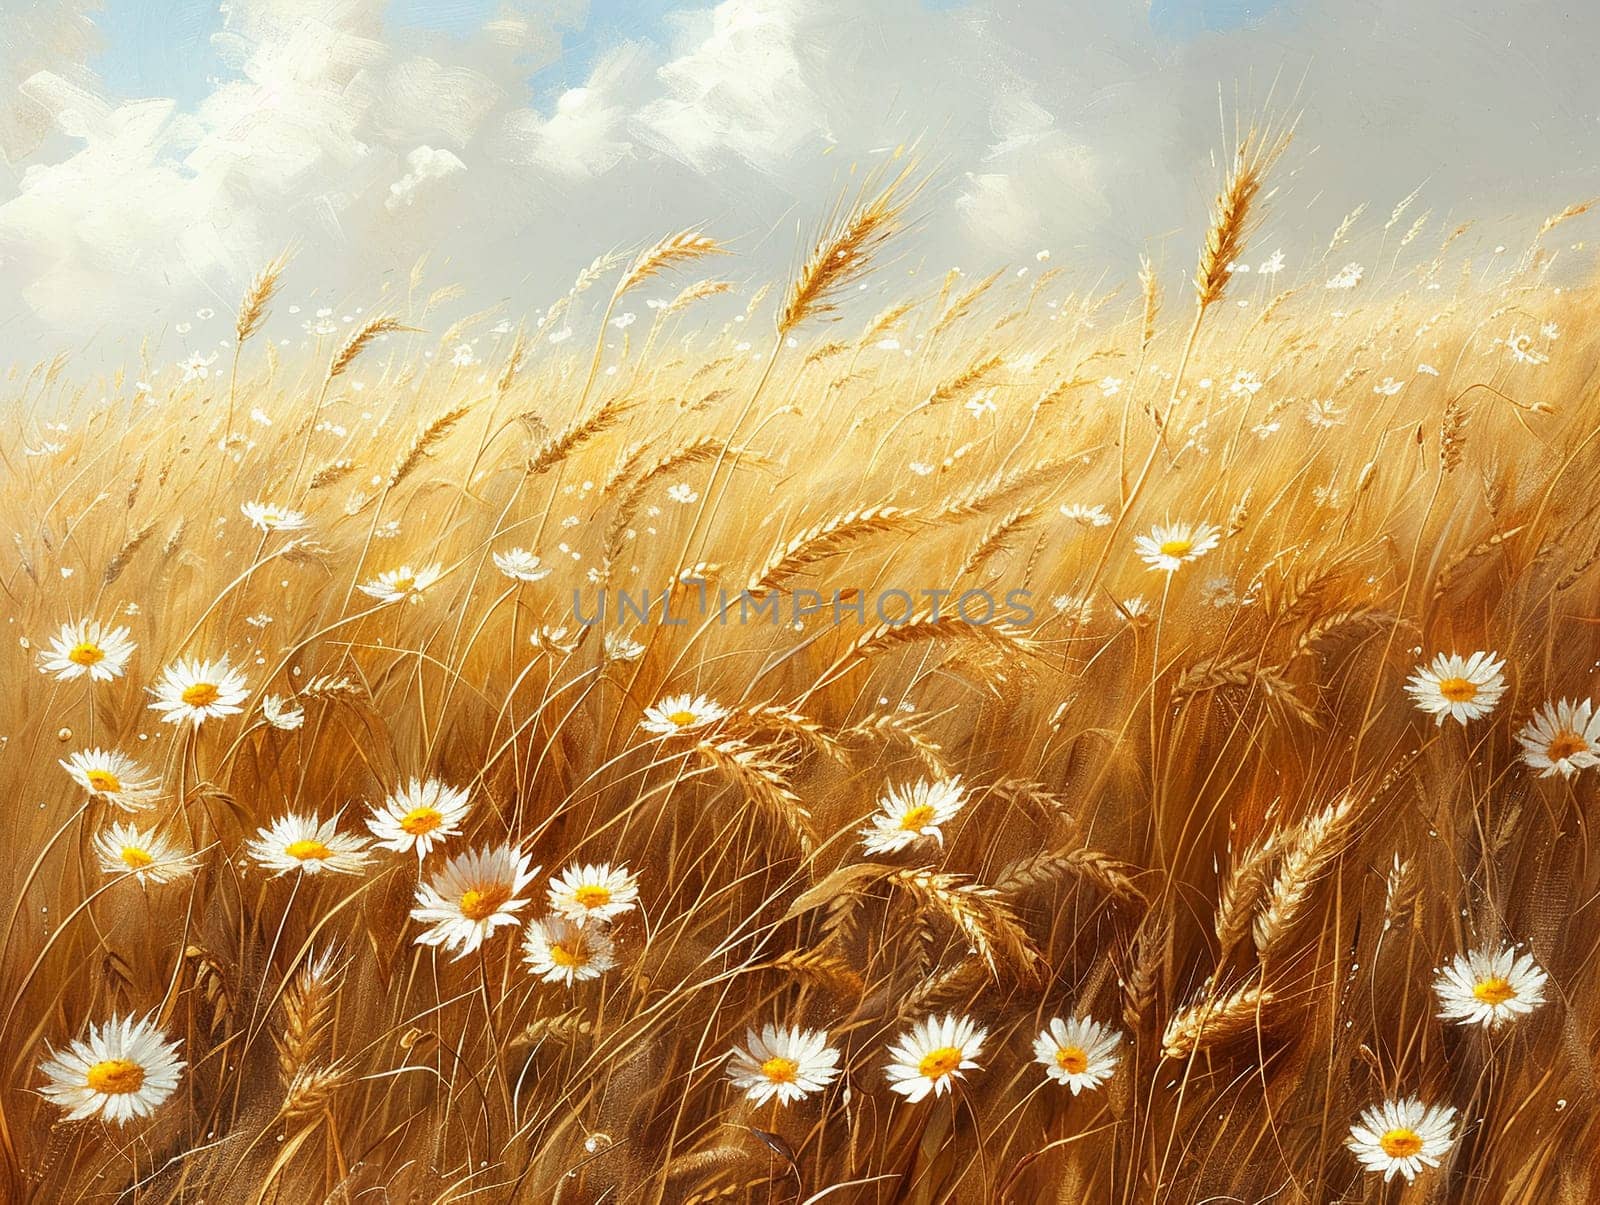 Golden wheat field swaying in the breeze, ideal for agricultural and country themes.